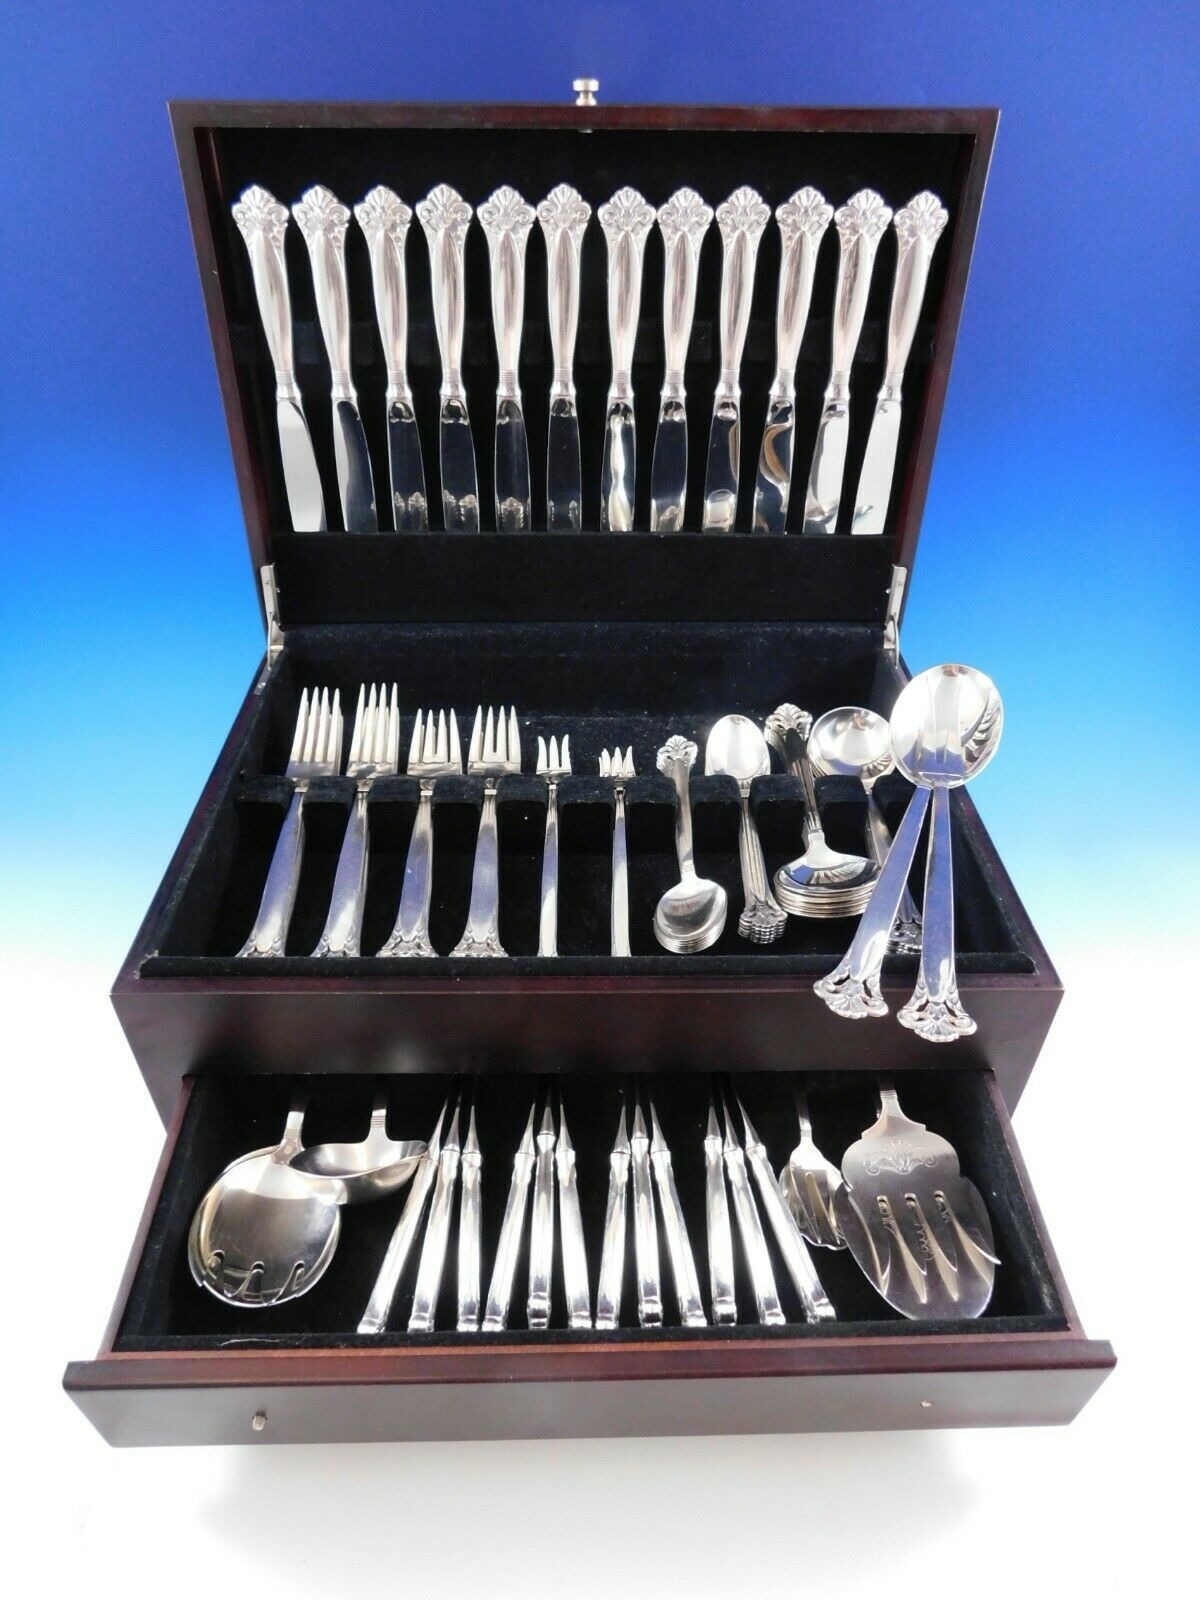 Primary image for Cloister by Marthinsen Sterling Silver Flatware Service Set 92 pcs Norway Dinner